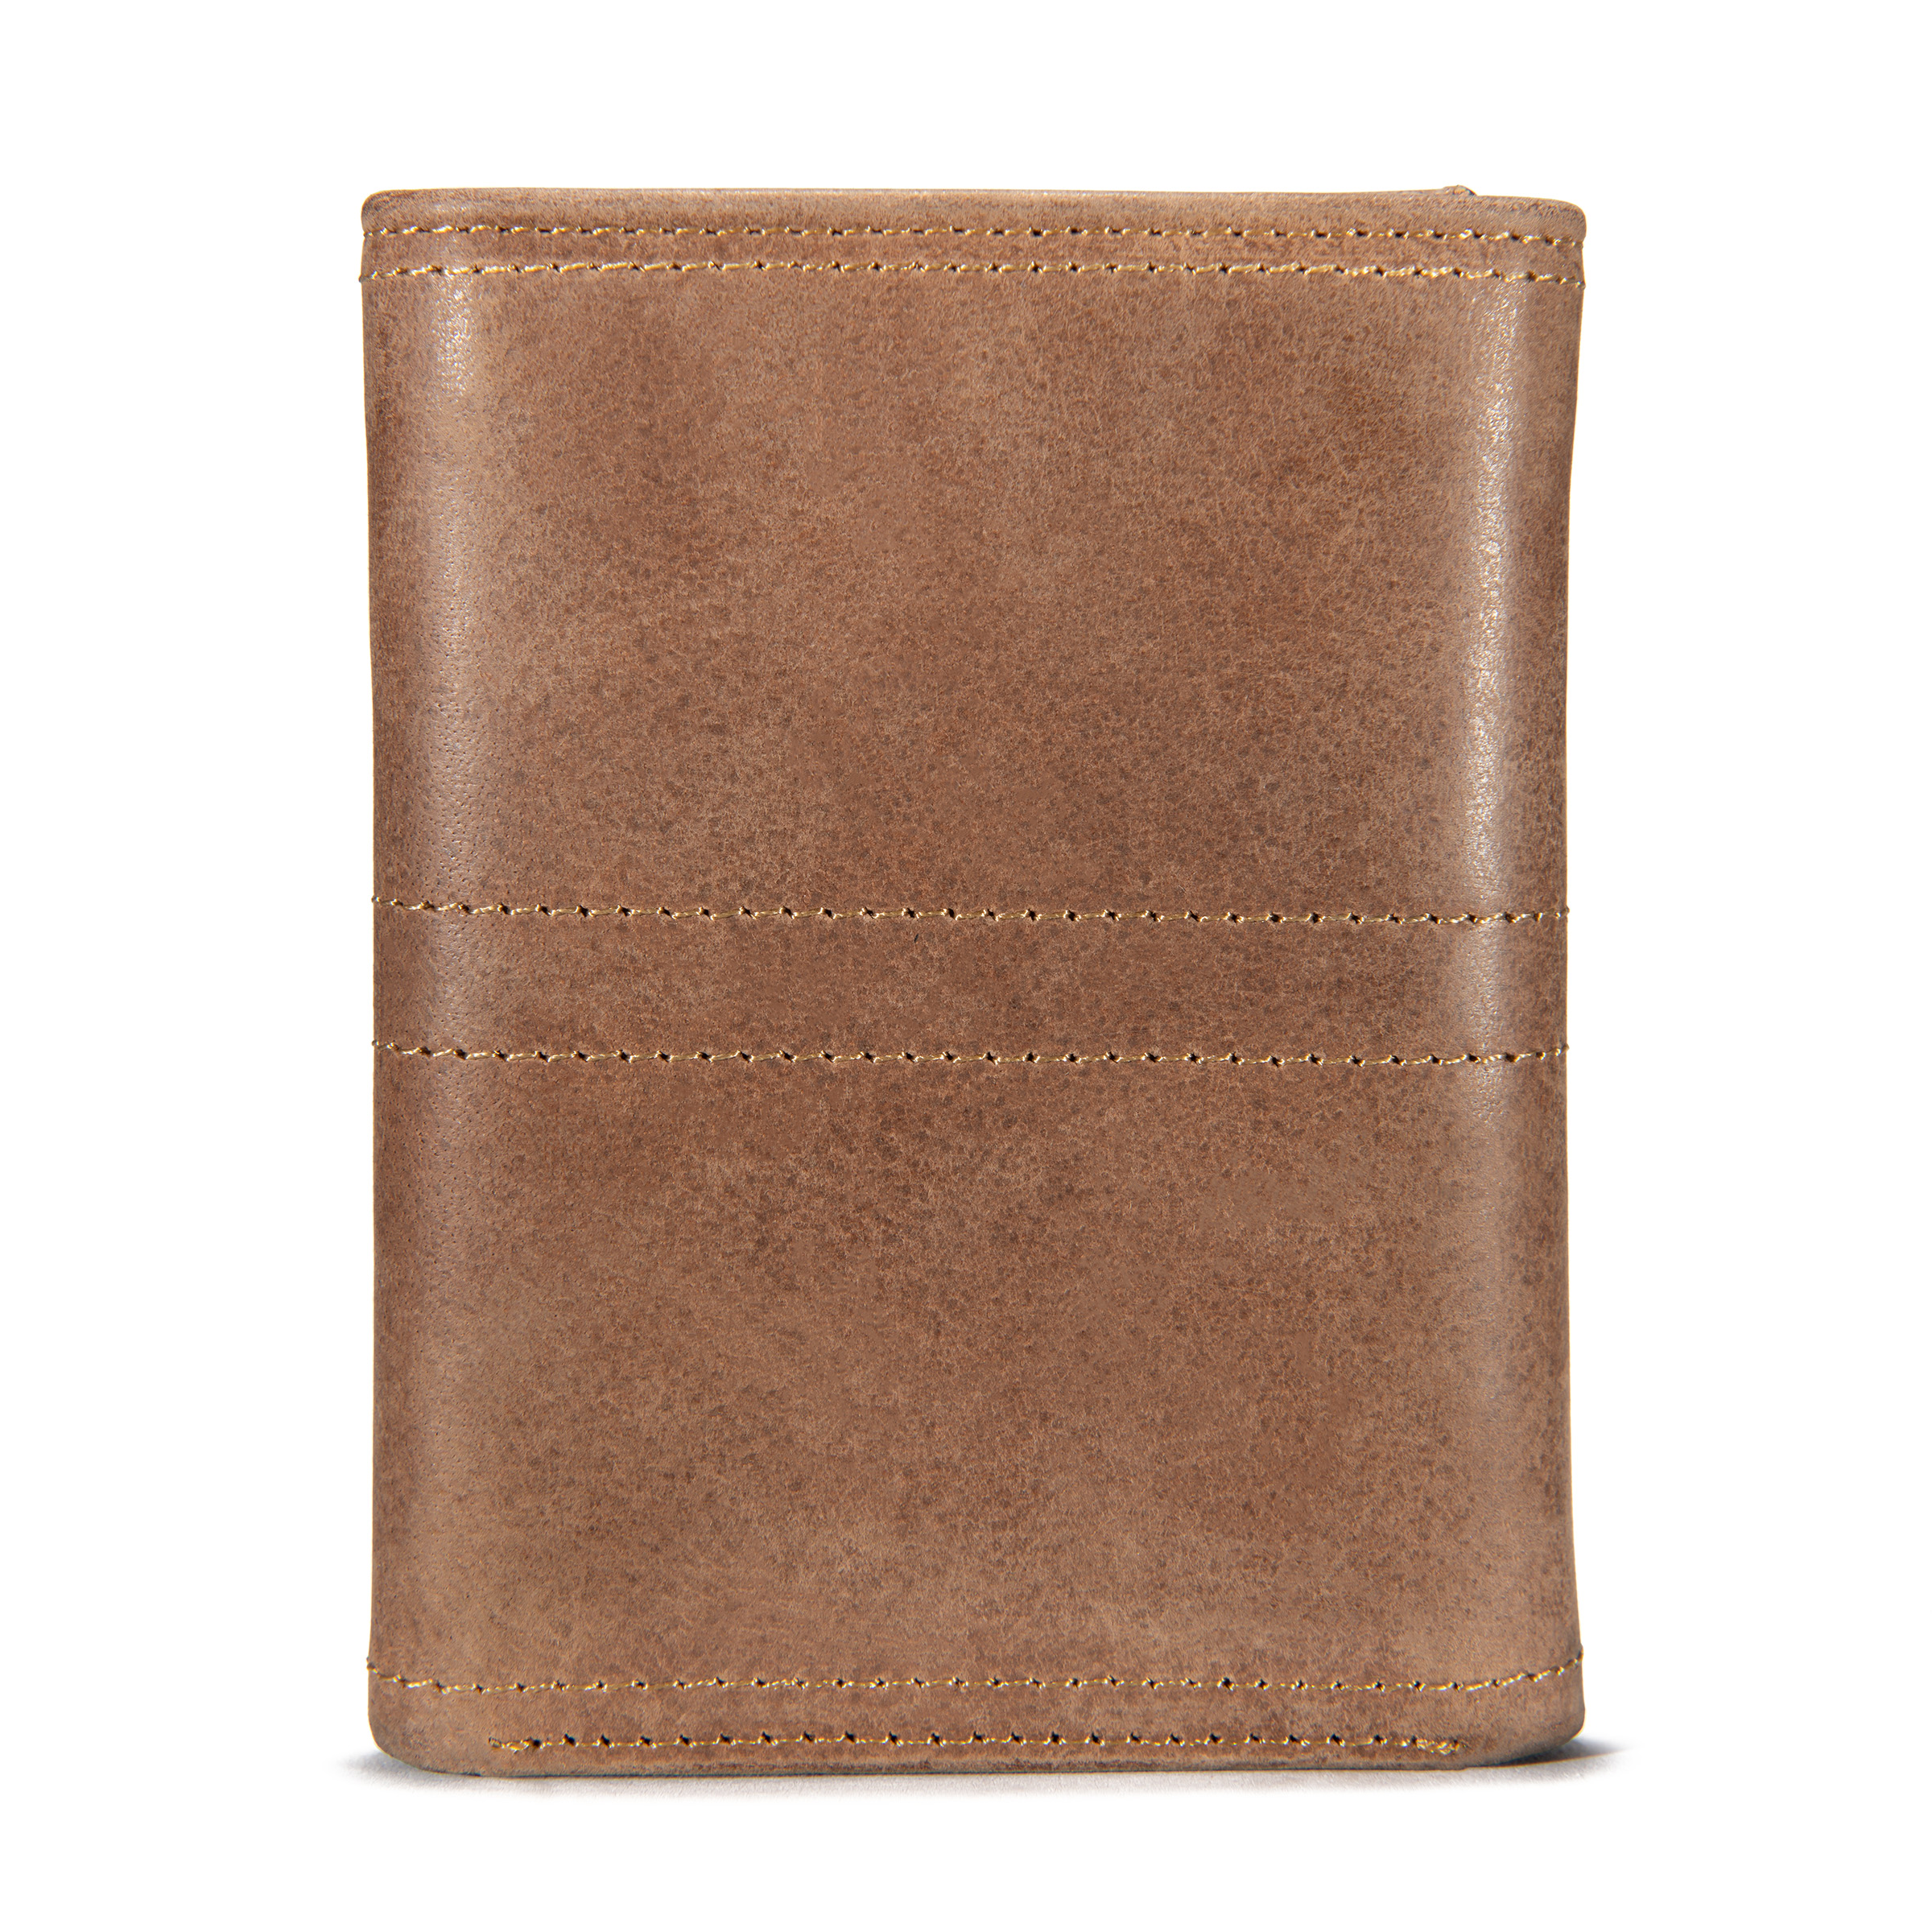 Picture of Carhartt B0000208 Mens Saddle Leather Trifold Wallet